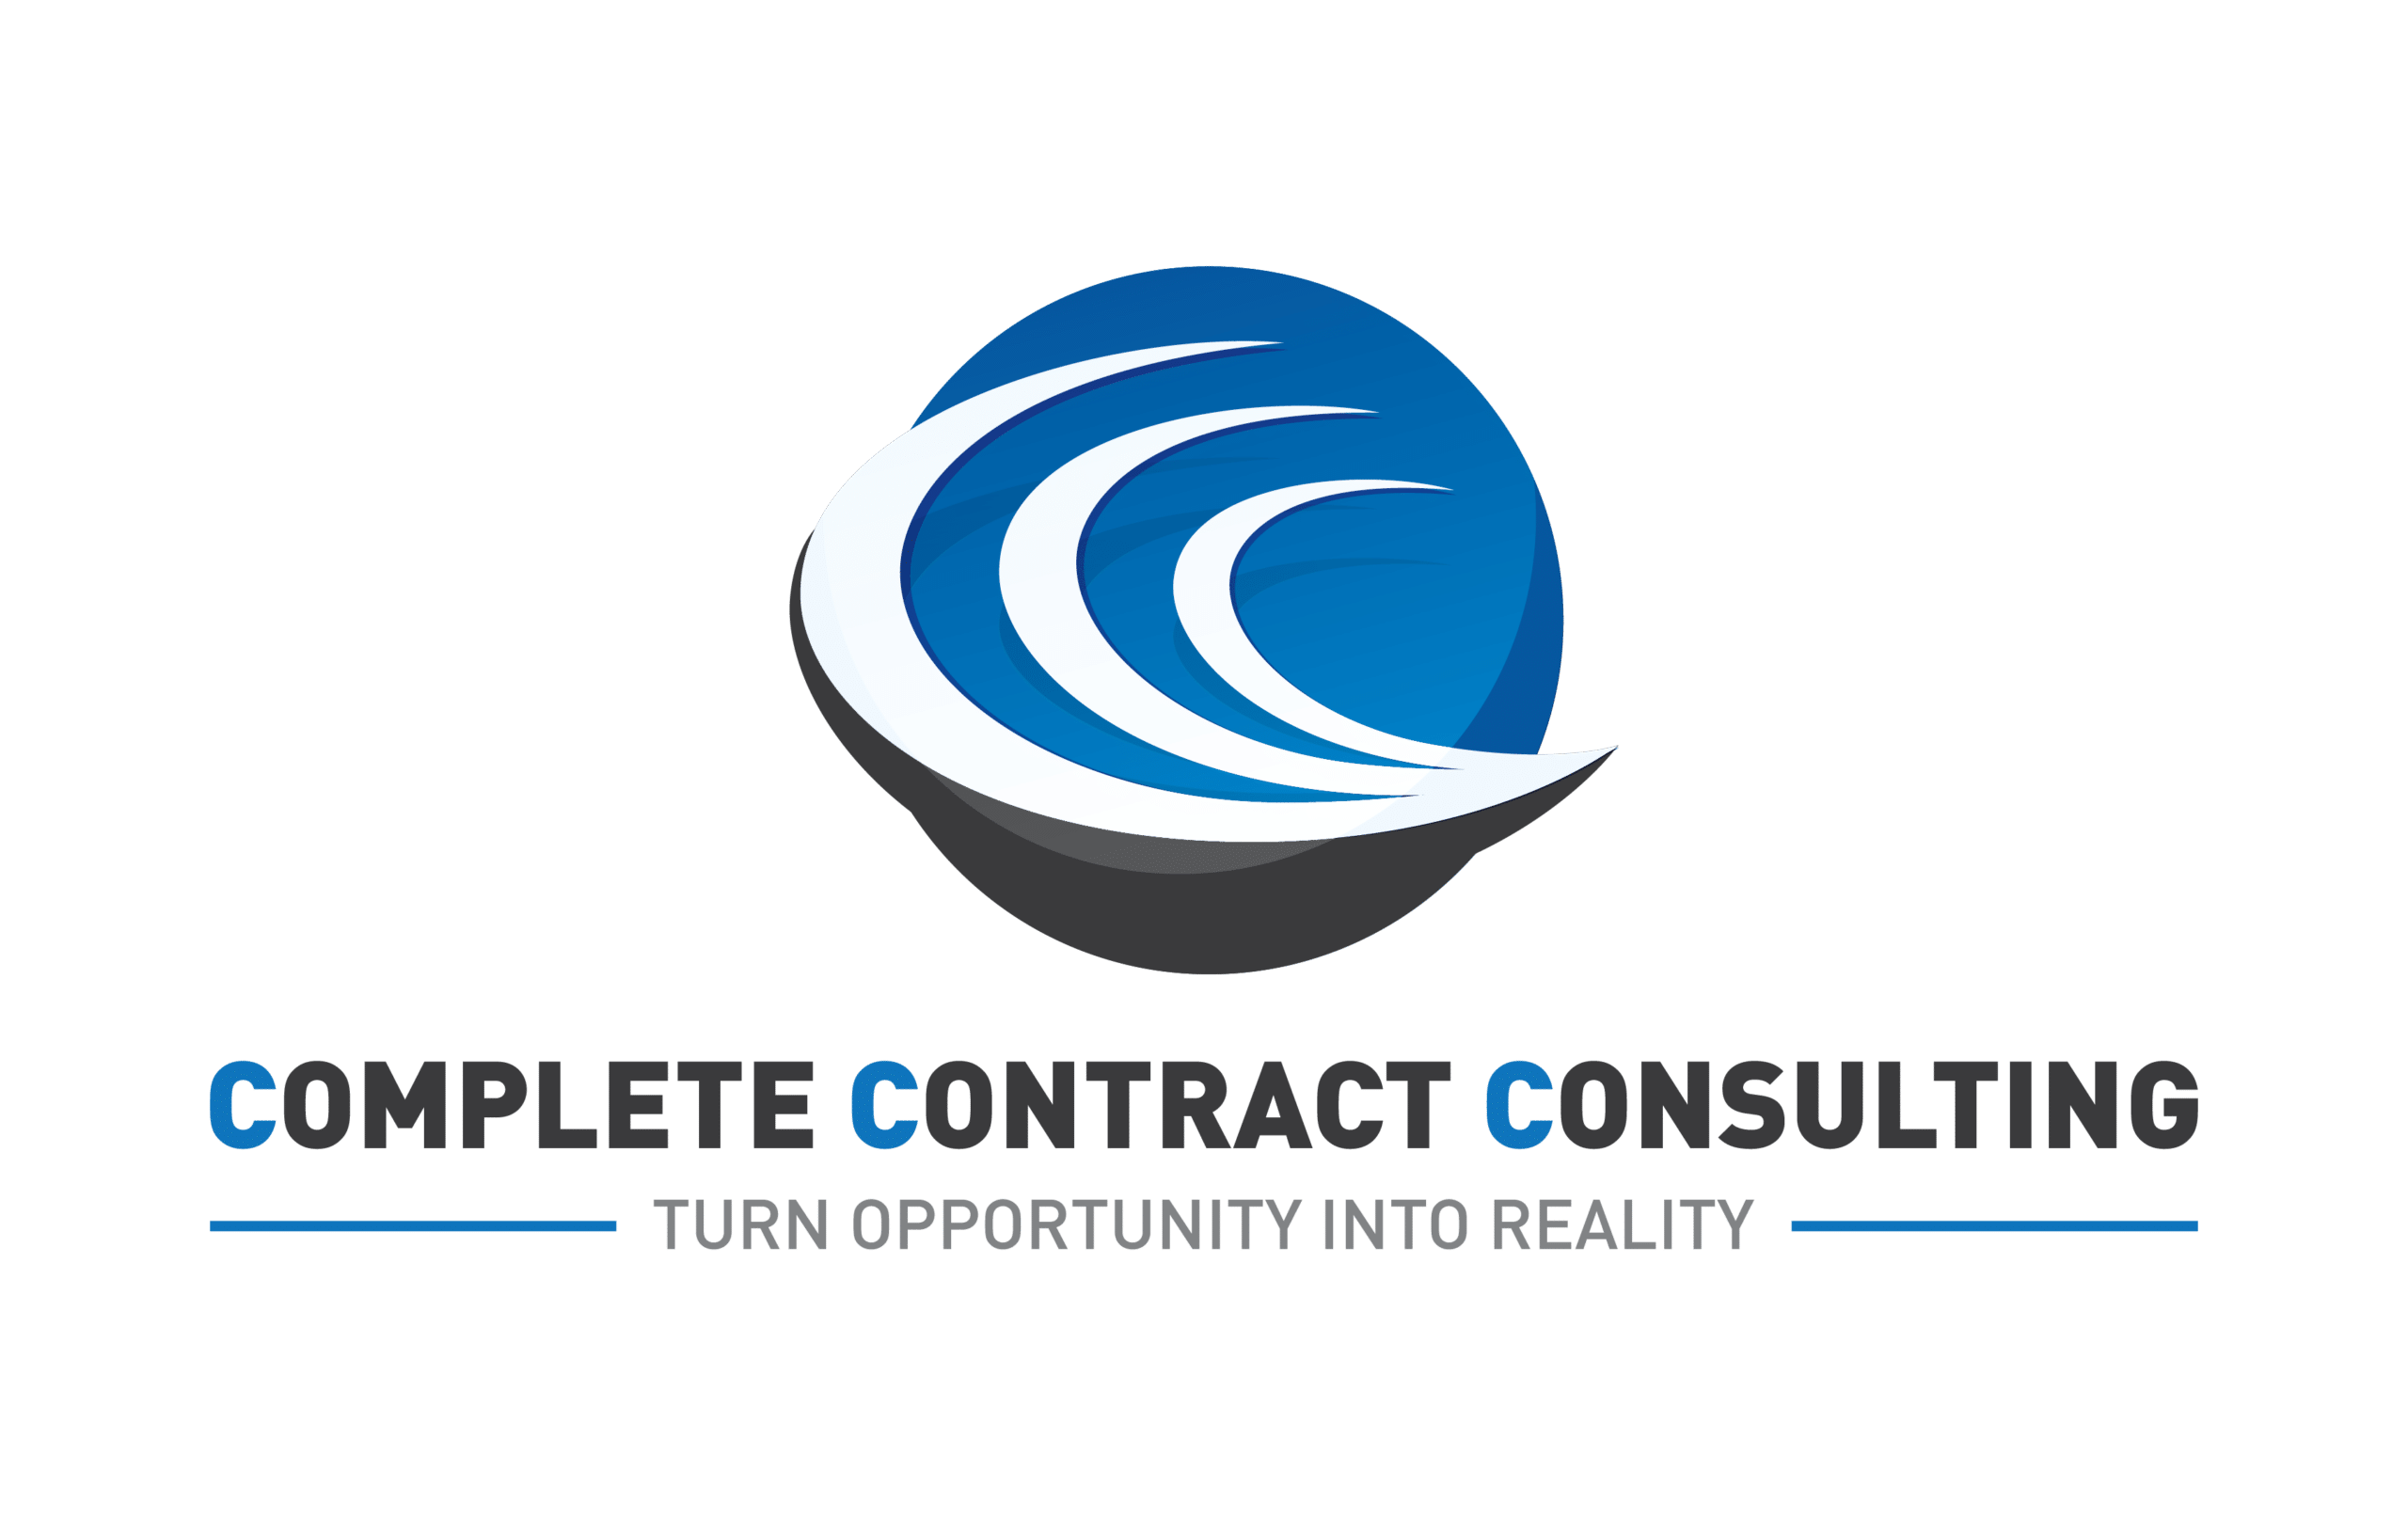 Complete Contracting Consulting